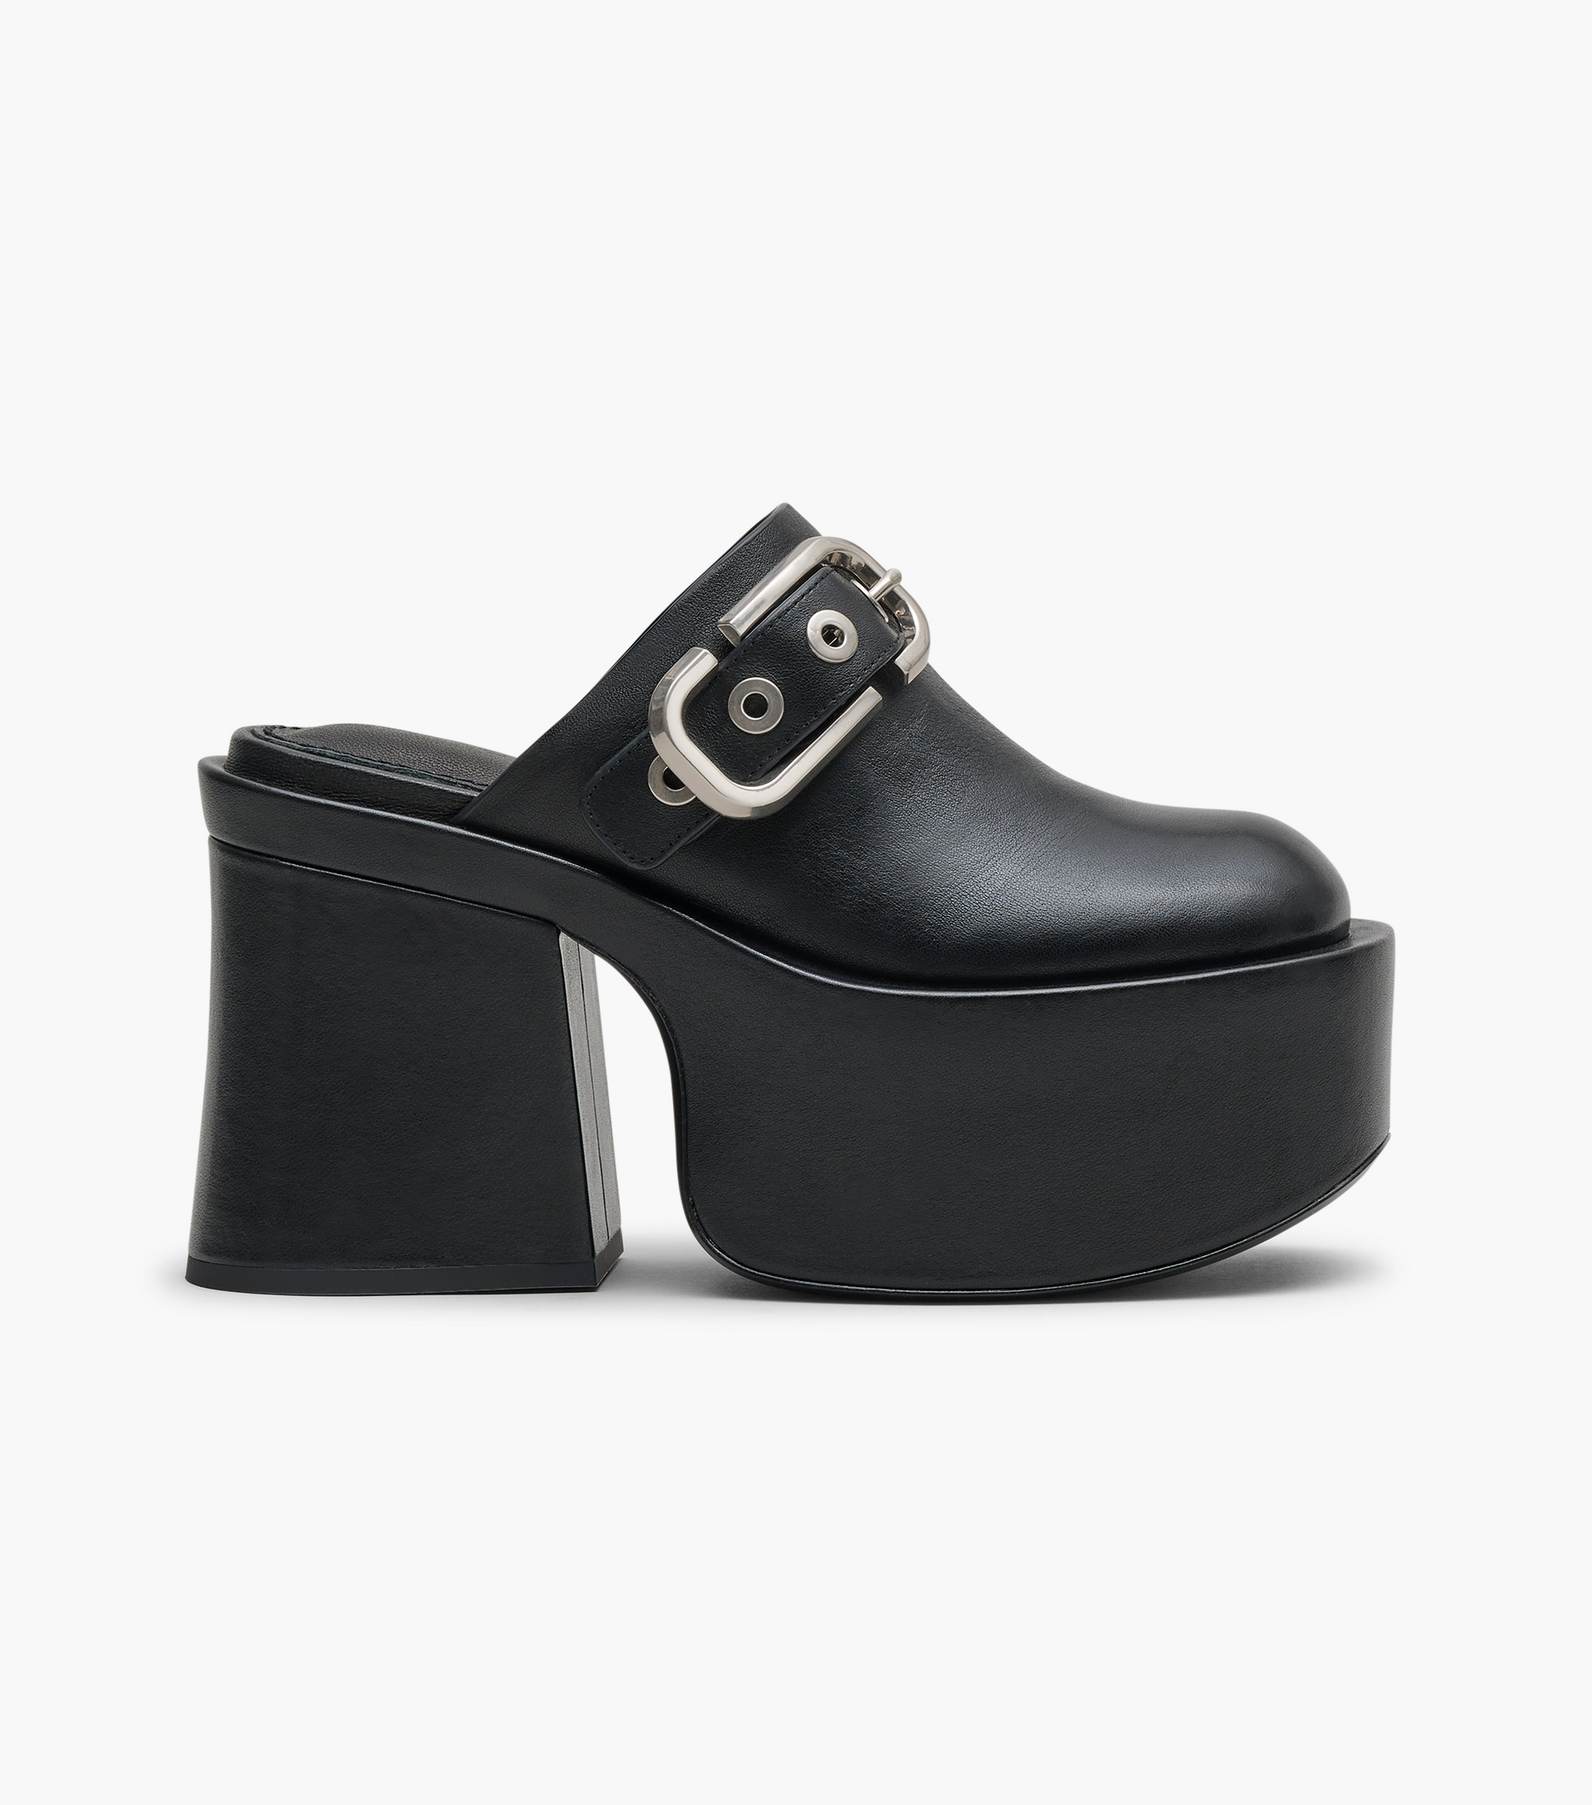 THE J MARC LEATHER CLOG